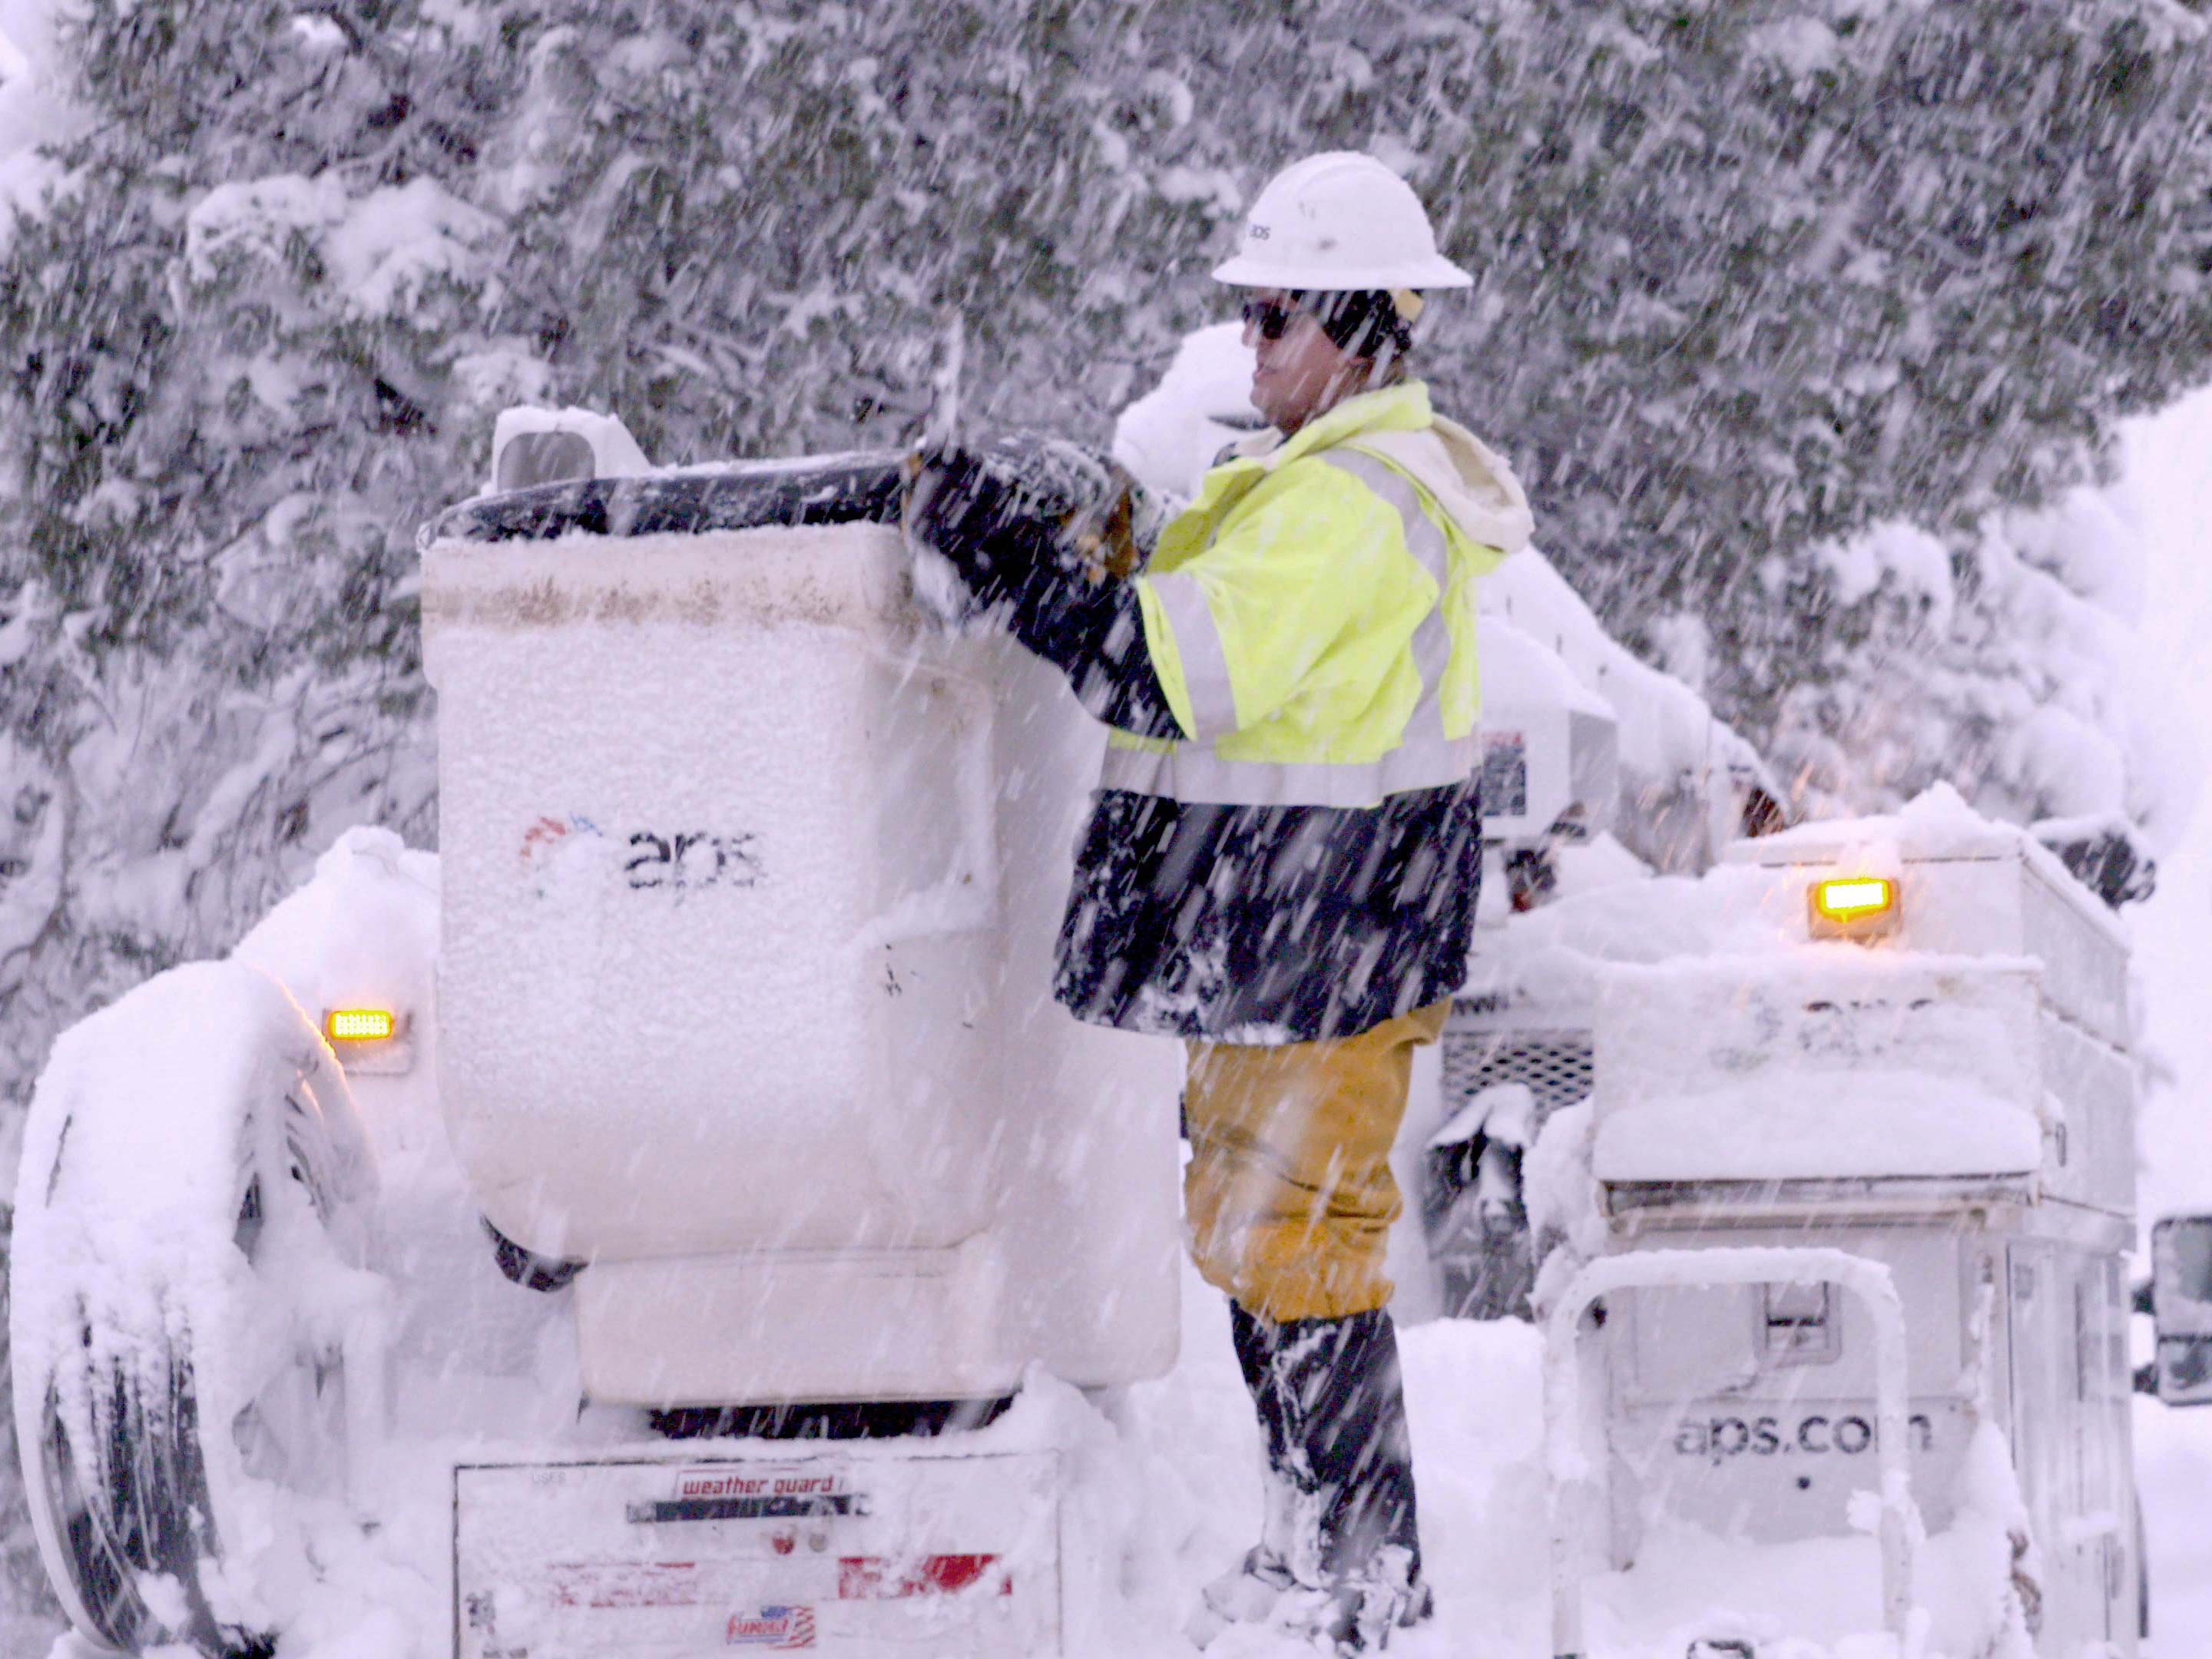 APS lineman working in the snow